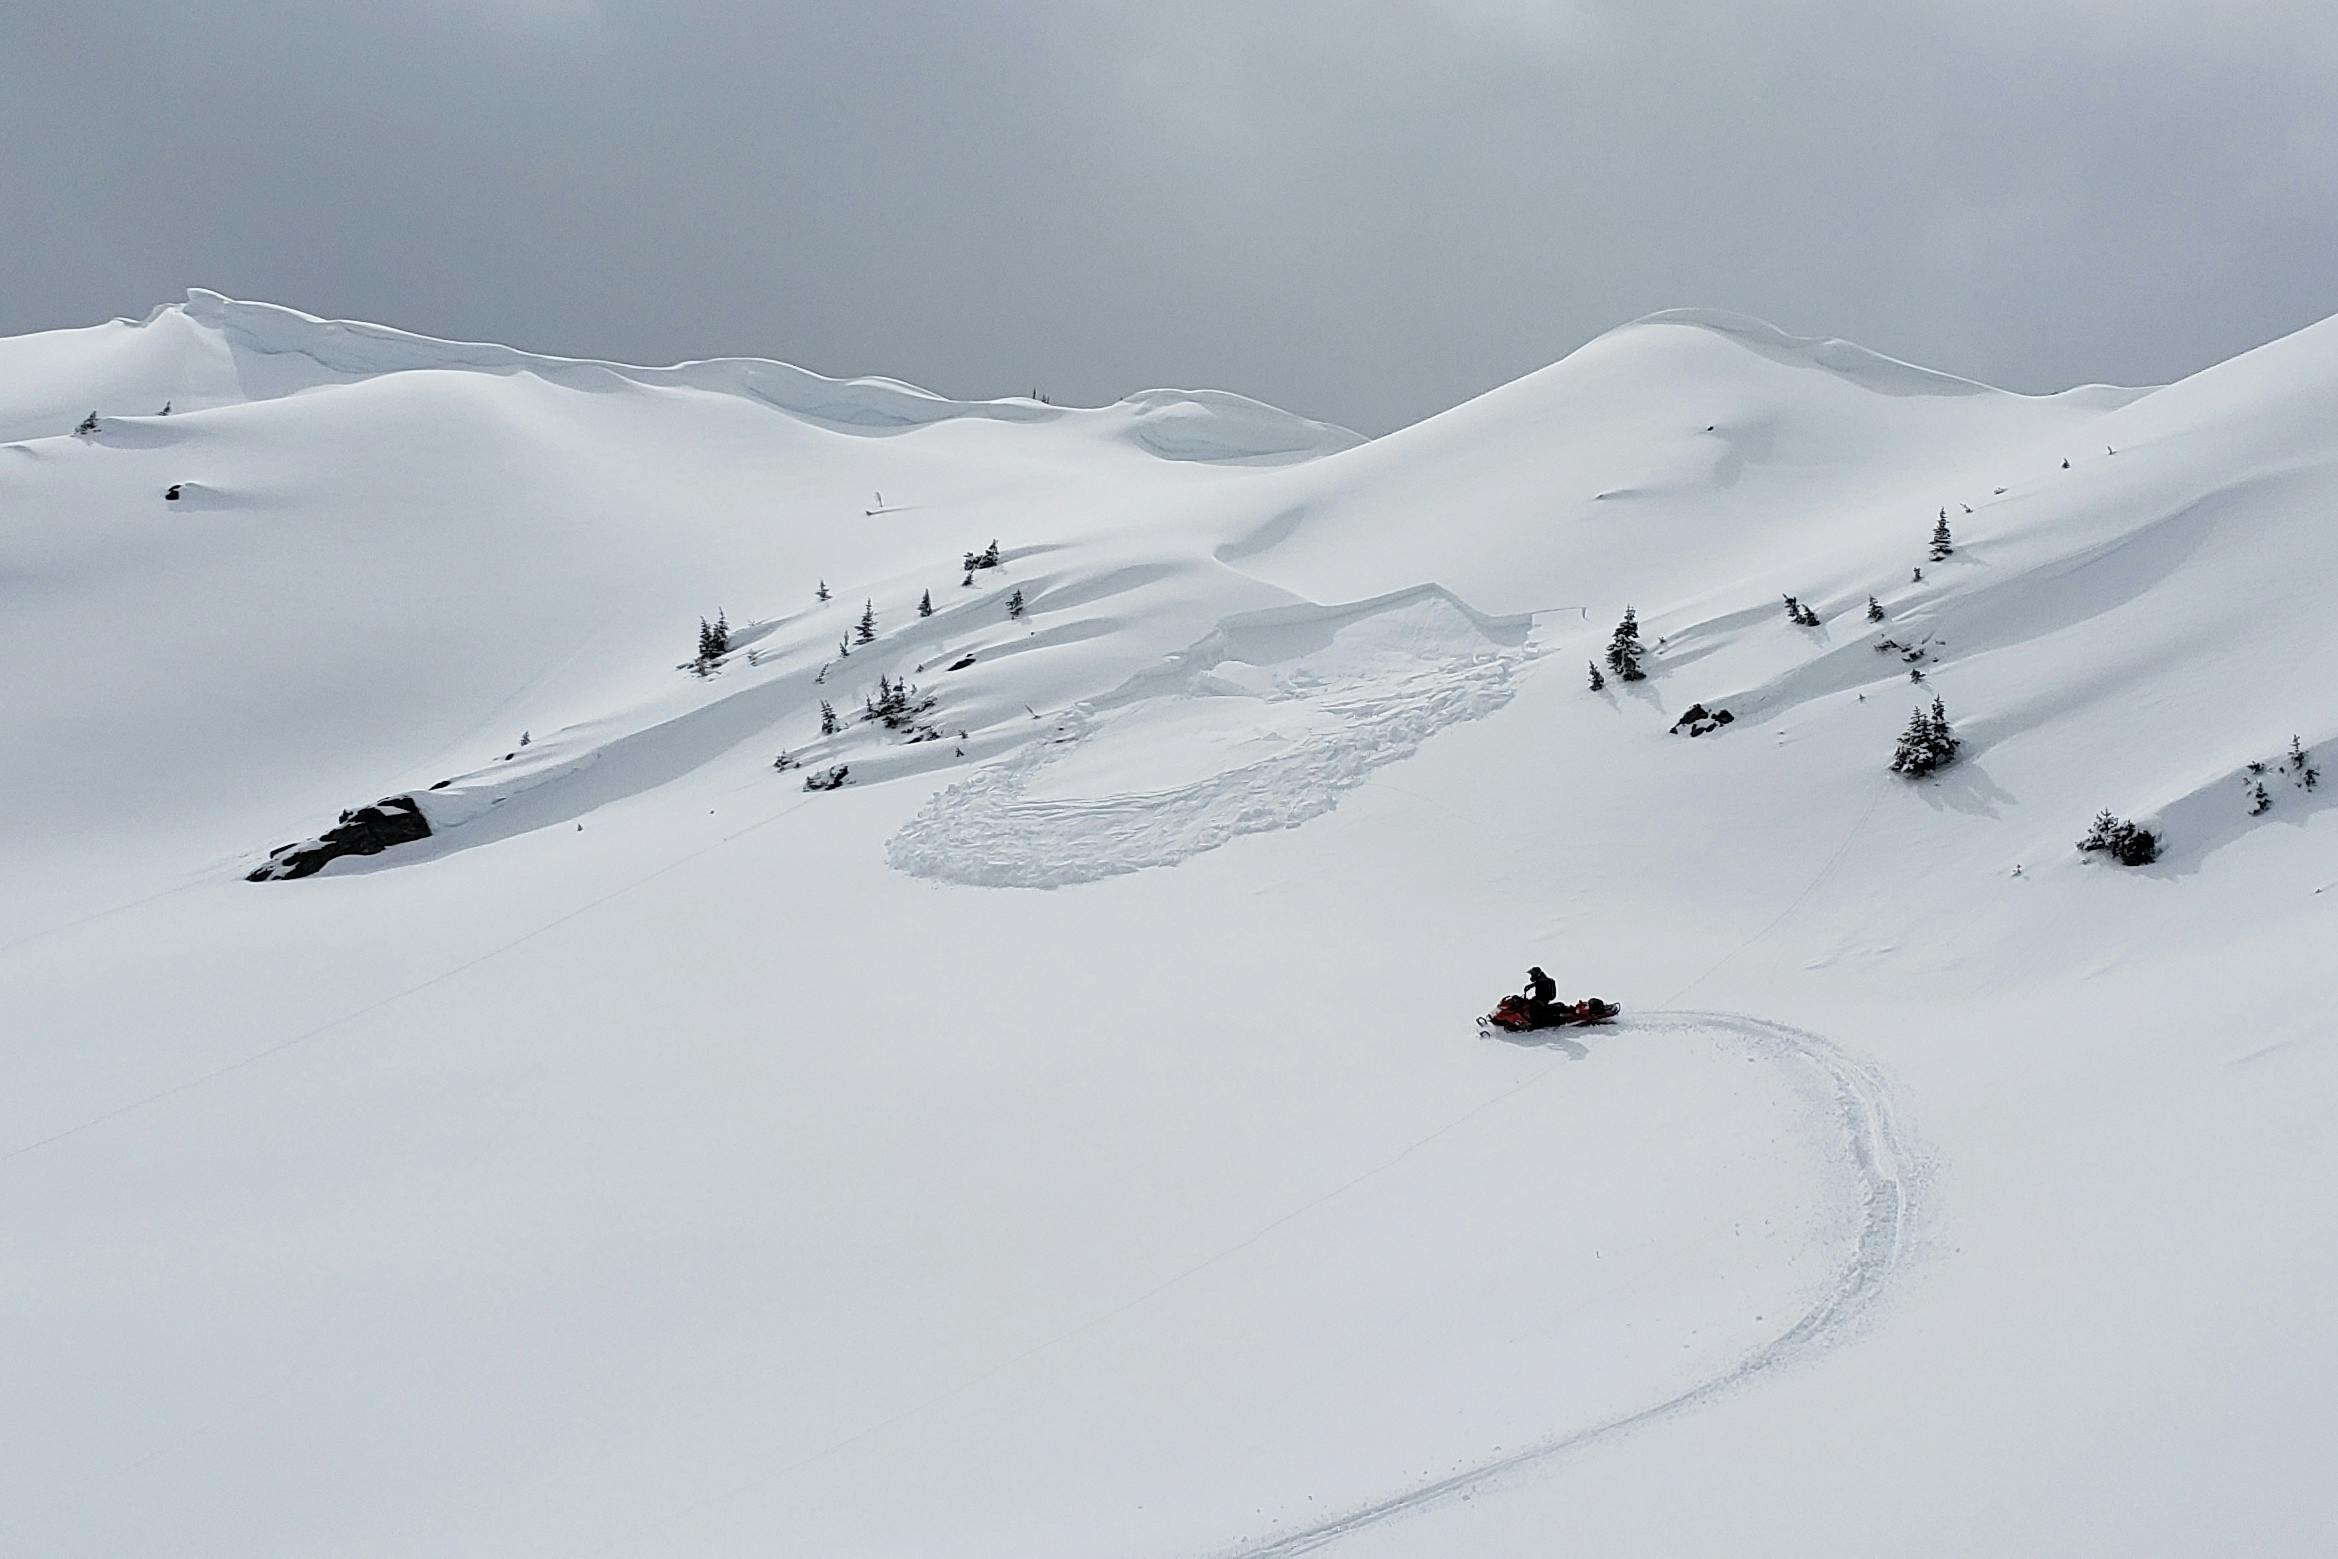 A snowmobiler triggers an avalanche from a distance.